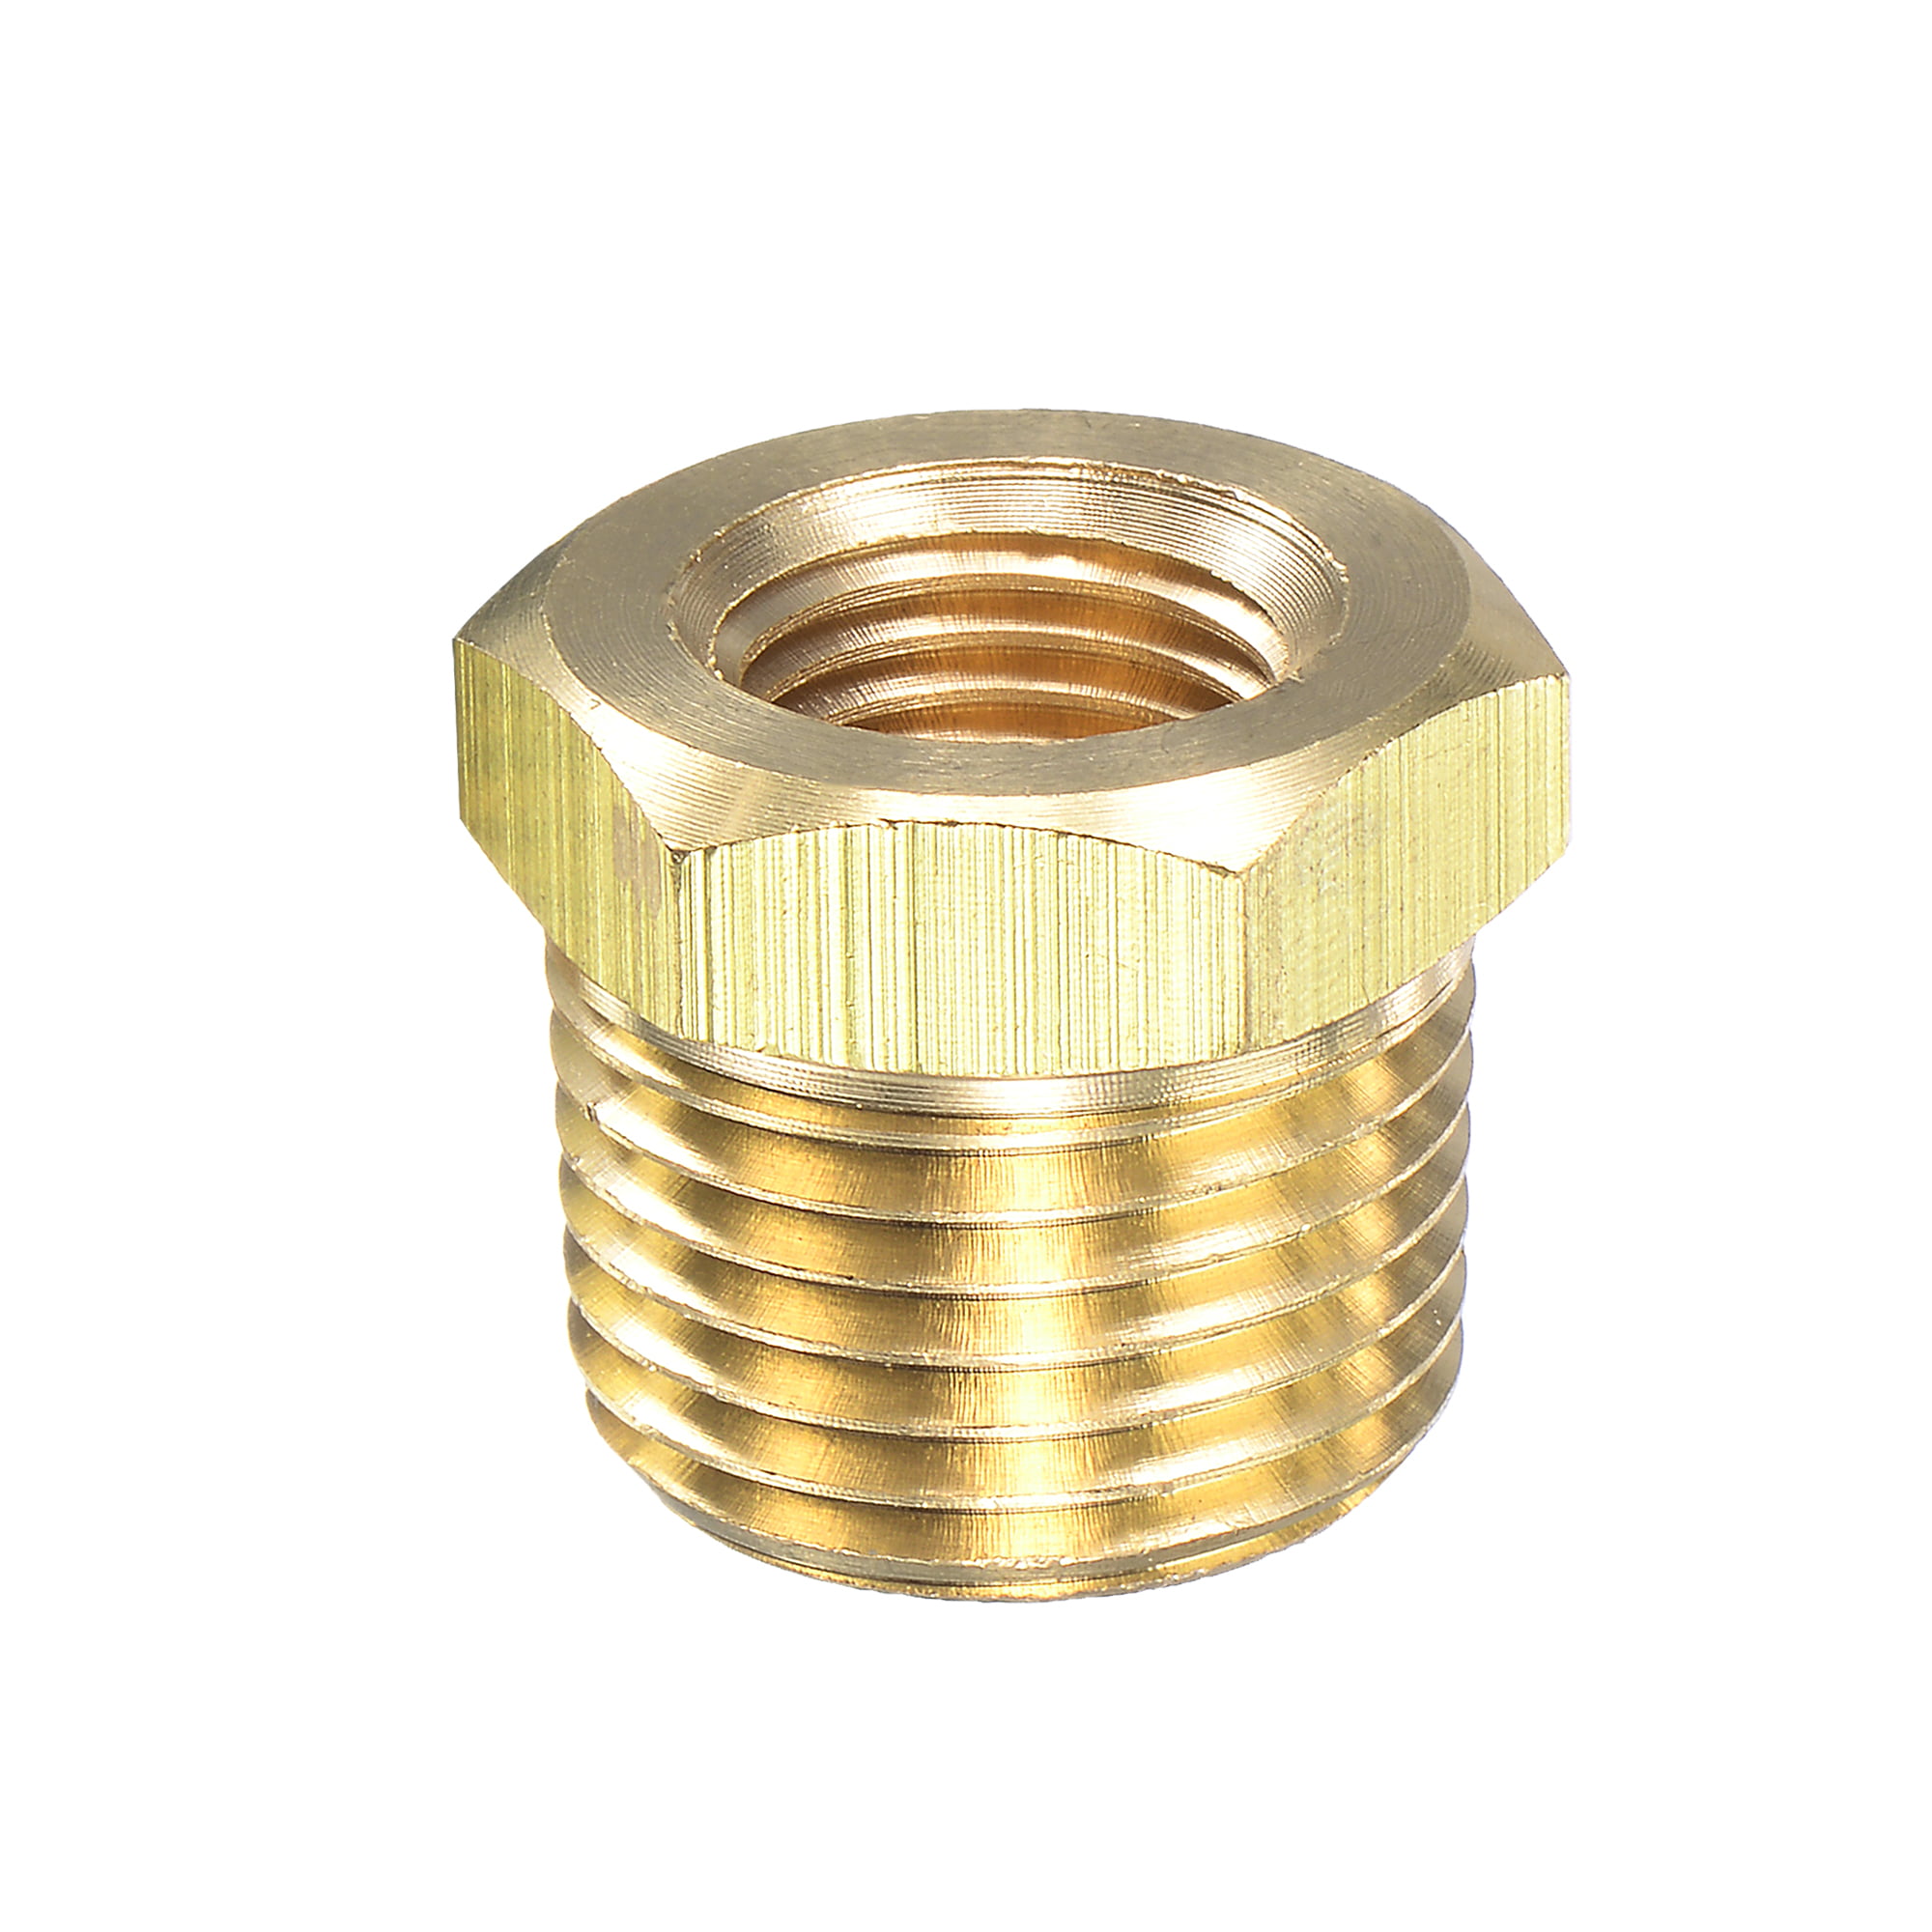 1/4 INCH NPT MALE TO 1/2 INCH NPT FEMALE BRASS PIPE FITTING REDUCER ADAPTER 